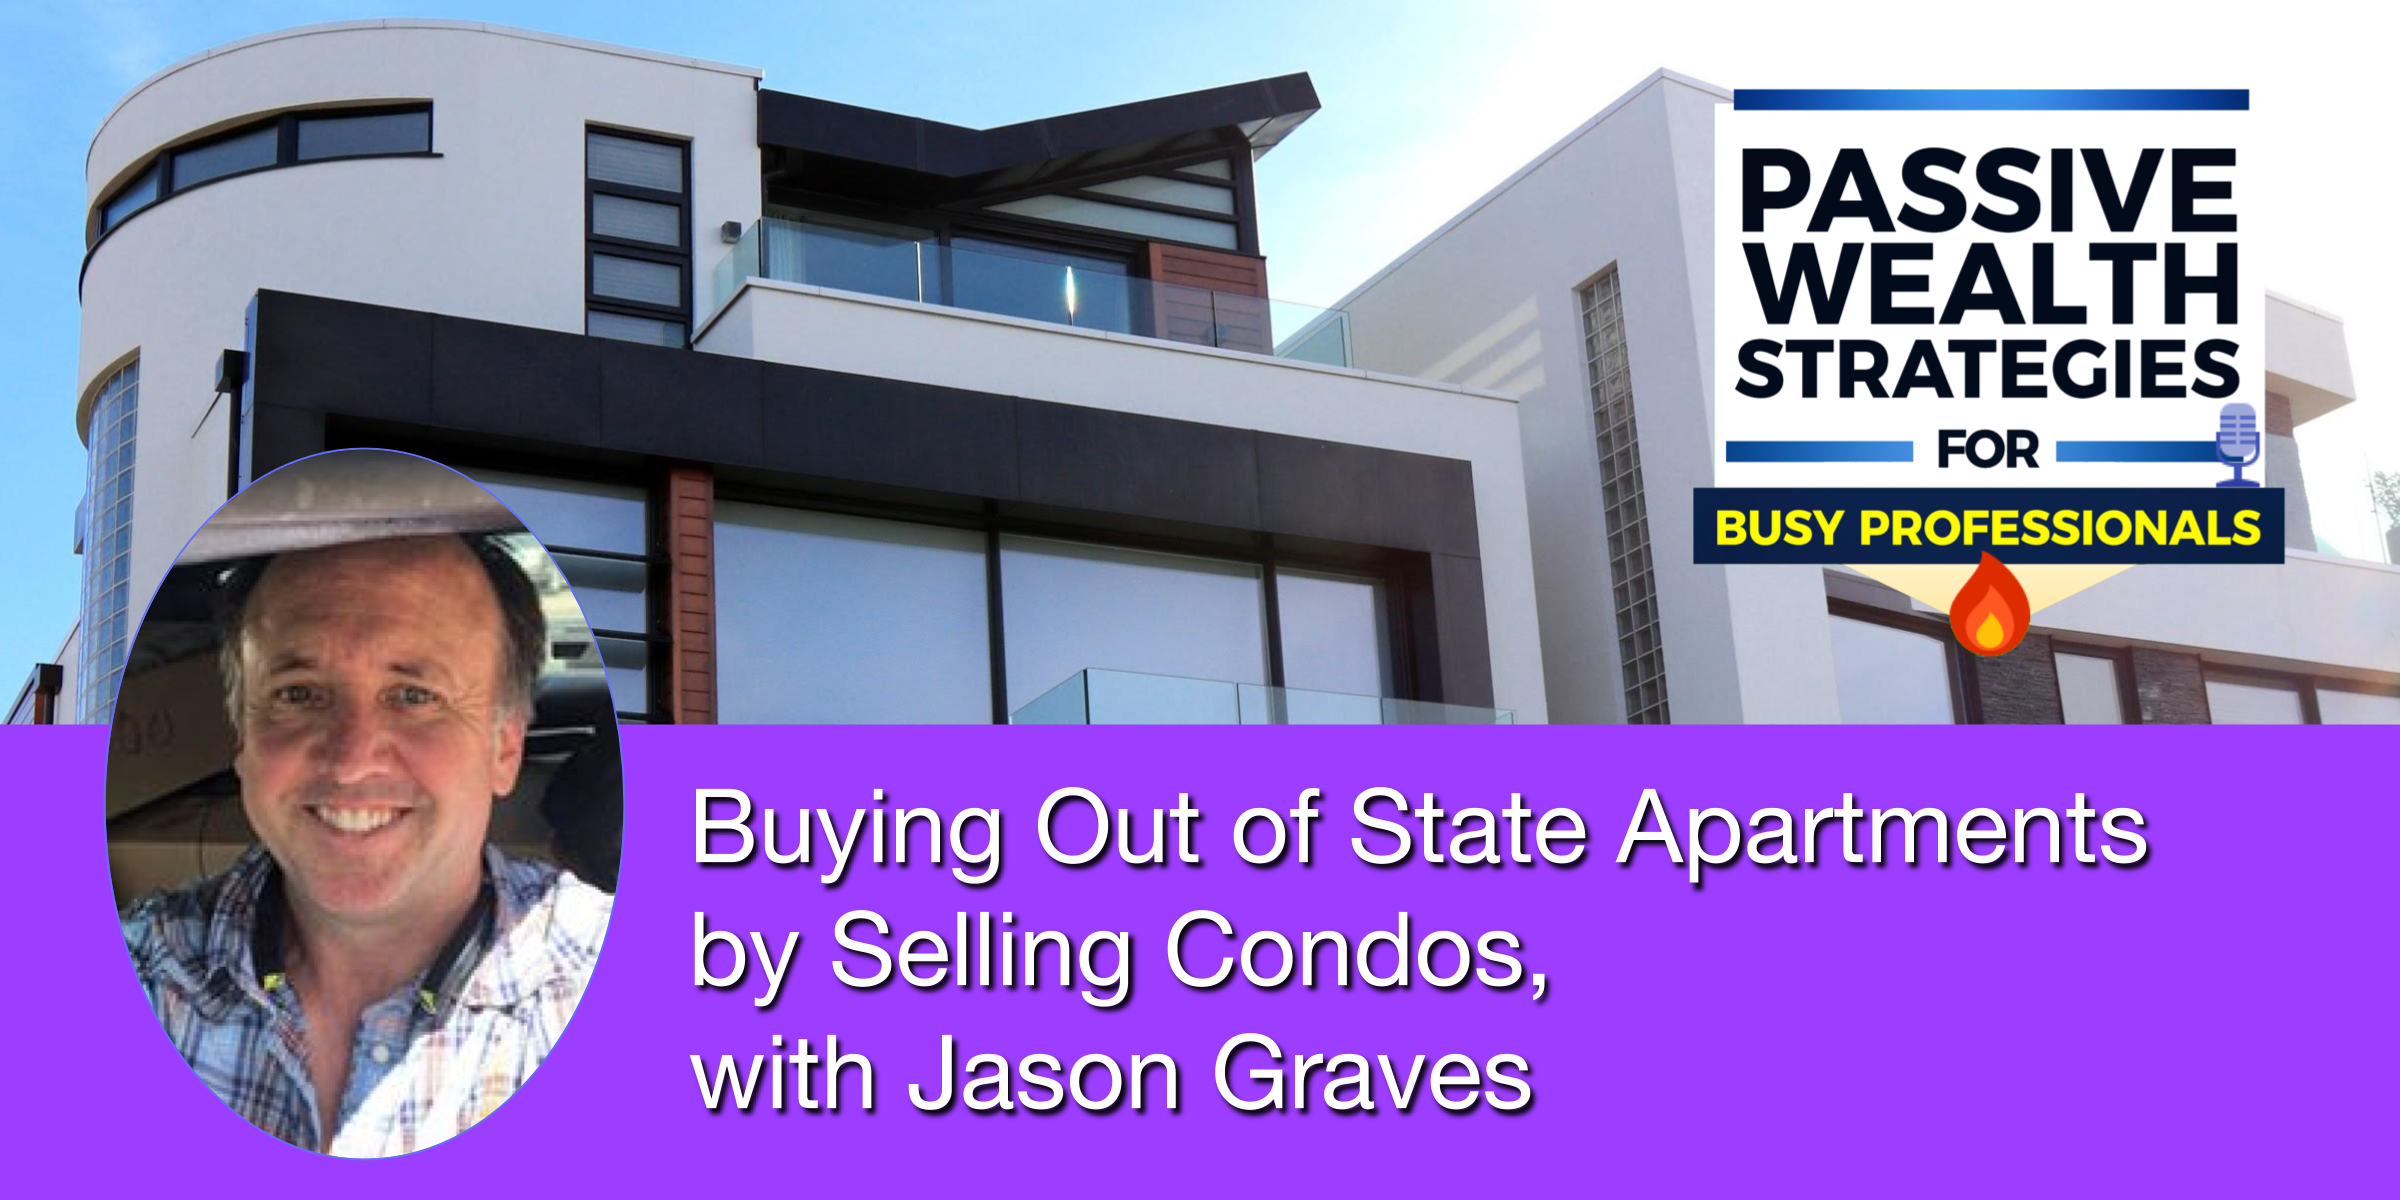 Buying Out of State Apartments by Selling Condos, with Jason Graves